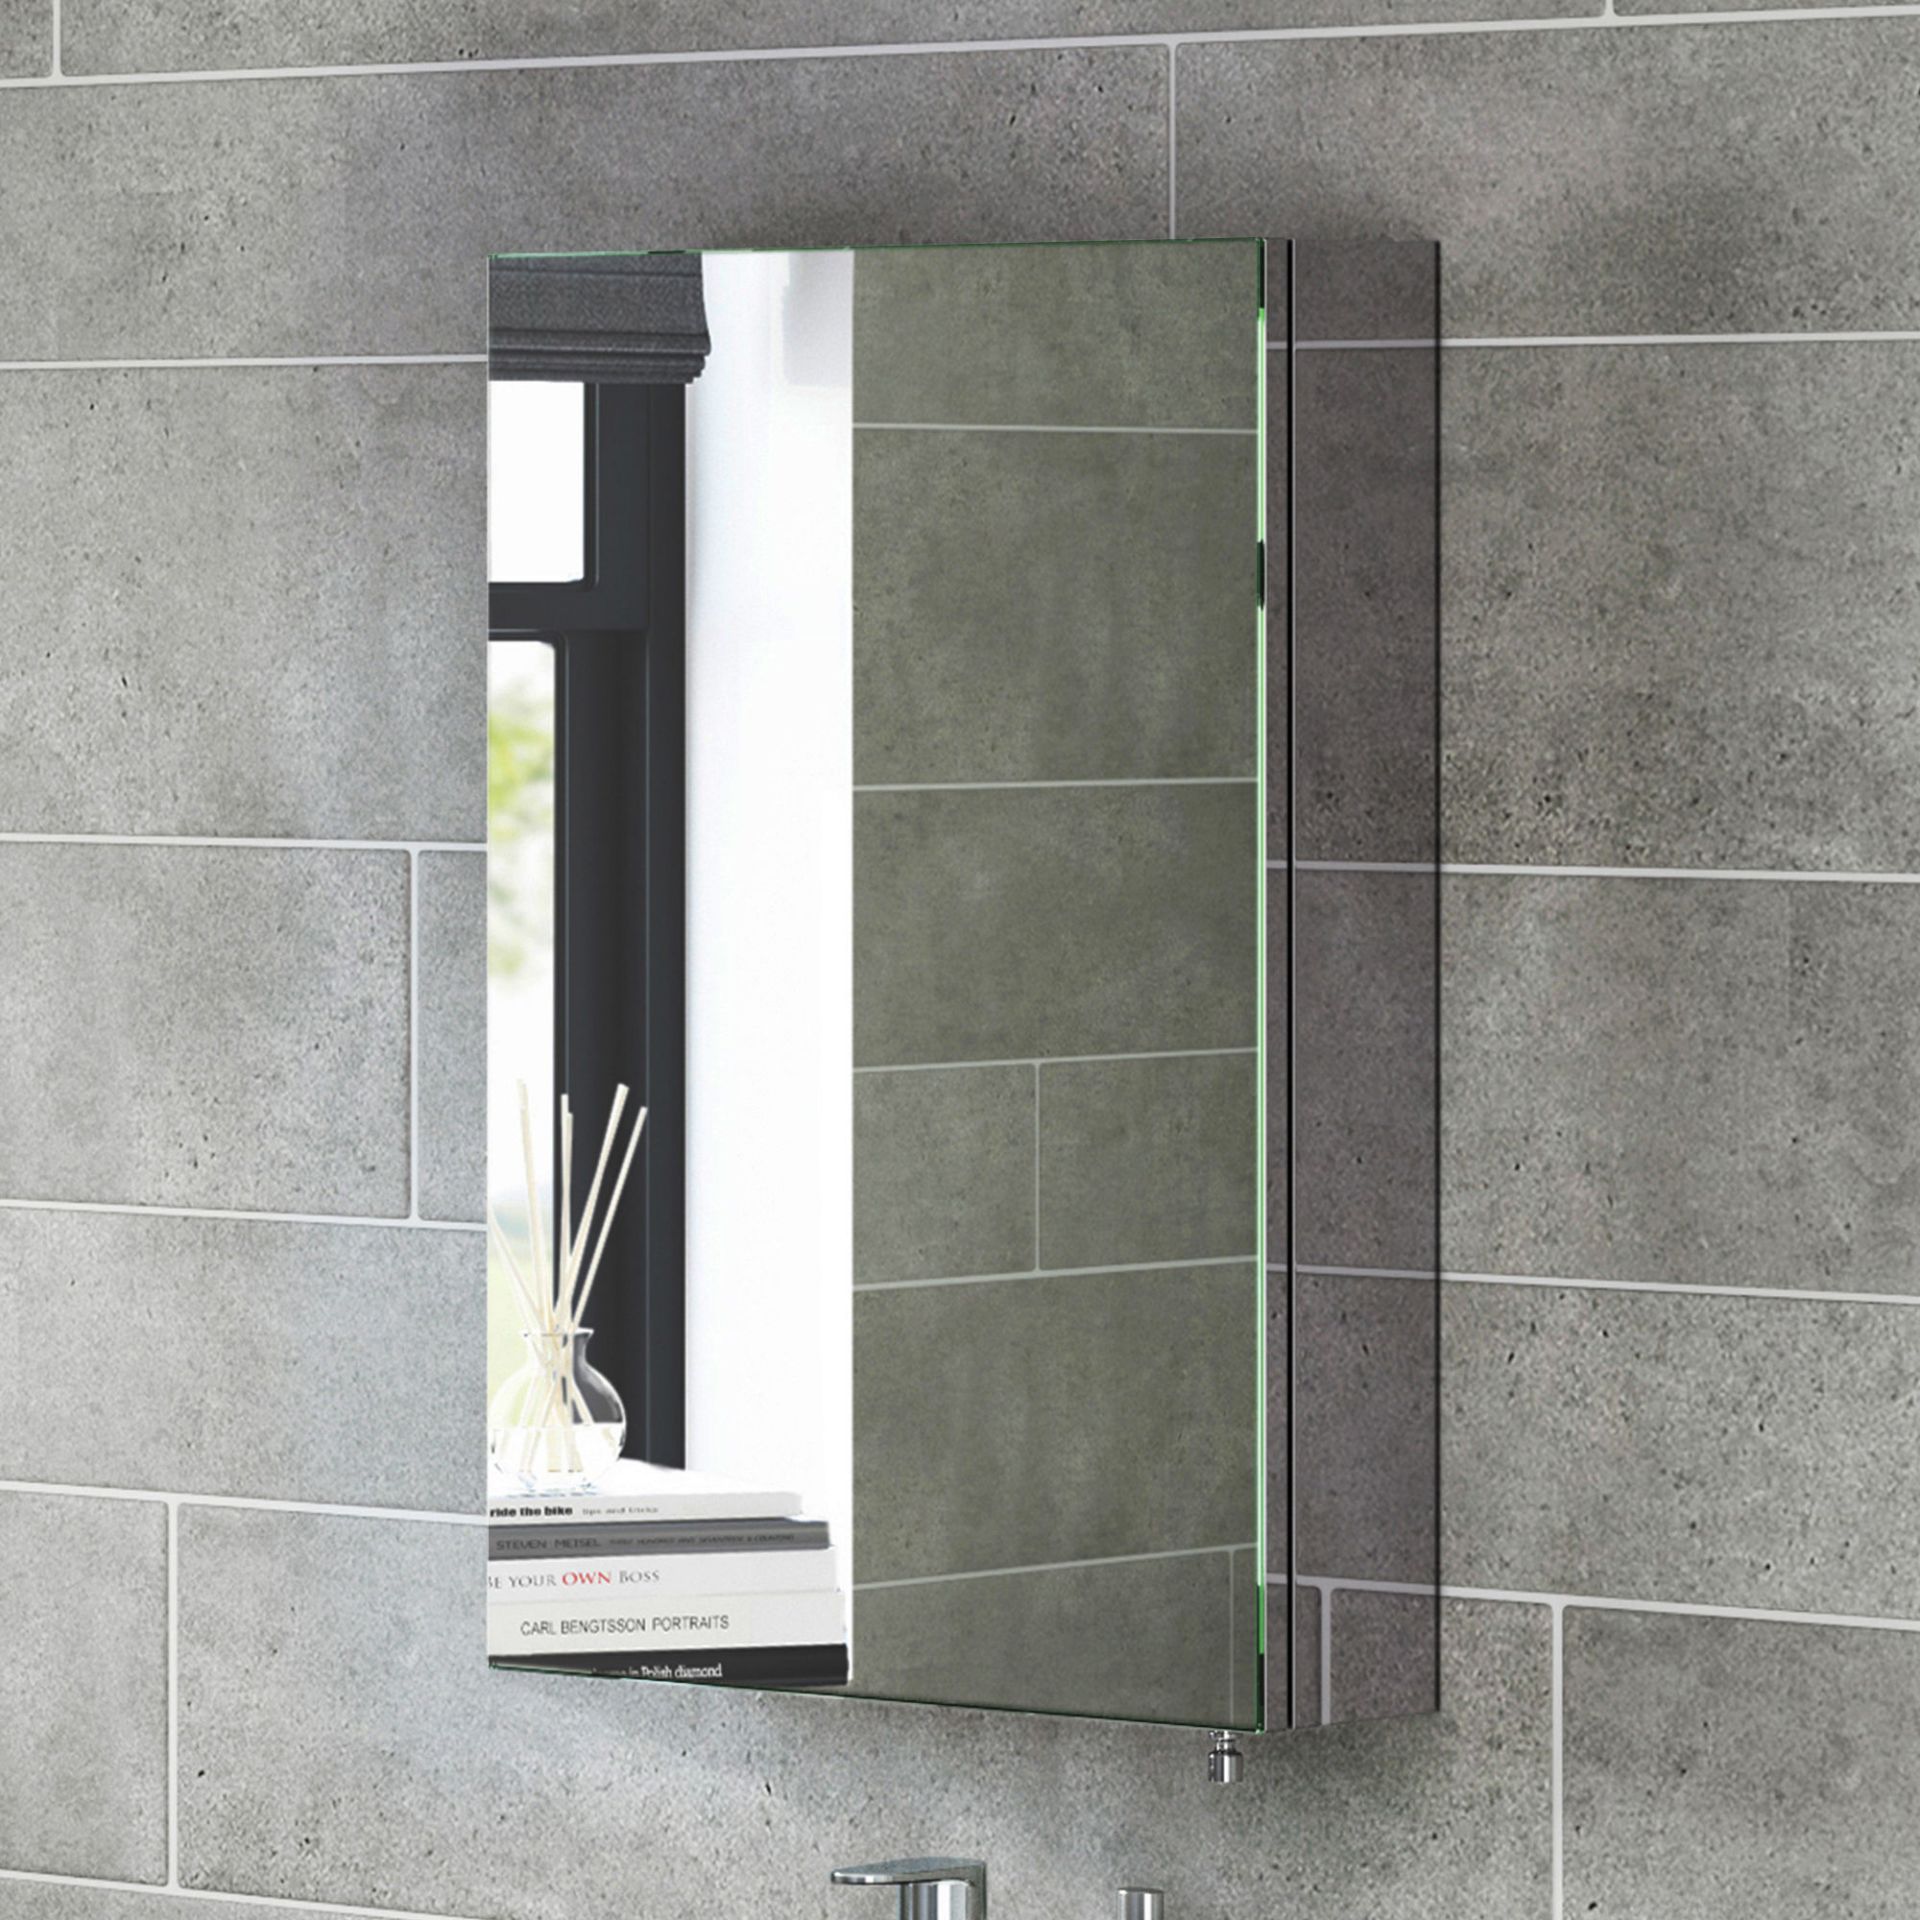 (ZL120) 400x600mm Liberty Stainless Steel Single Door Mirror Cabinet. RRP £199.99. Made from high-